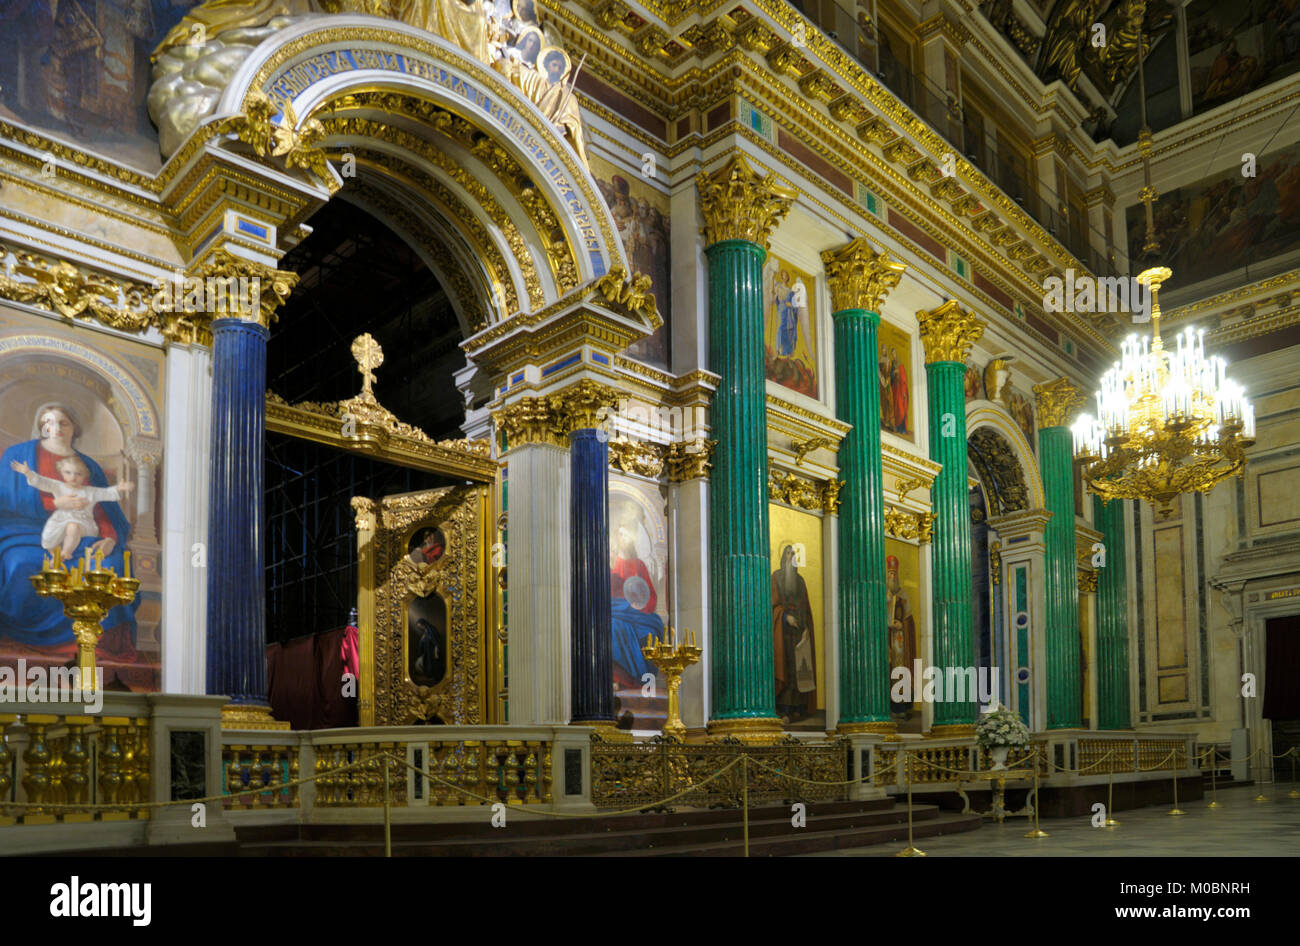 St. Petersburg, Russia - June 30, 2008: Interior of St. Isaacs cathedral. Stock Photo